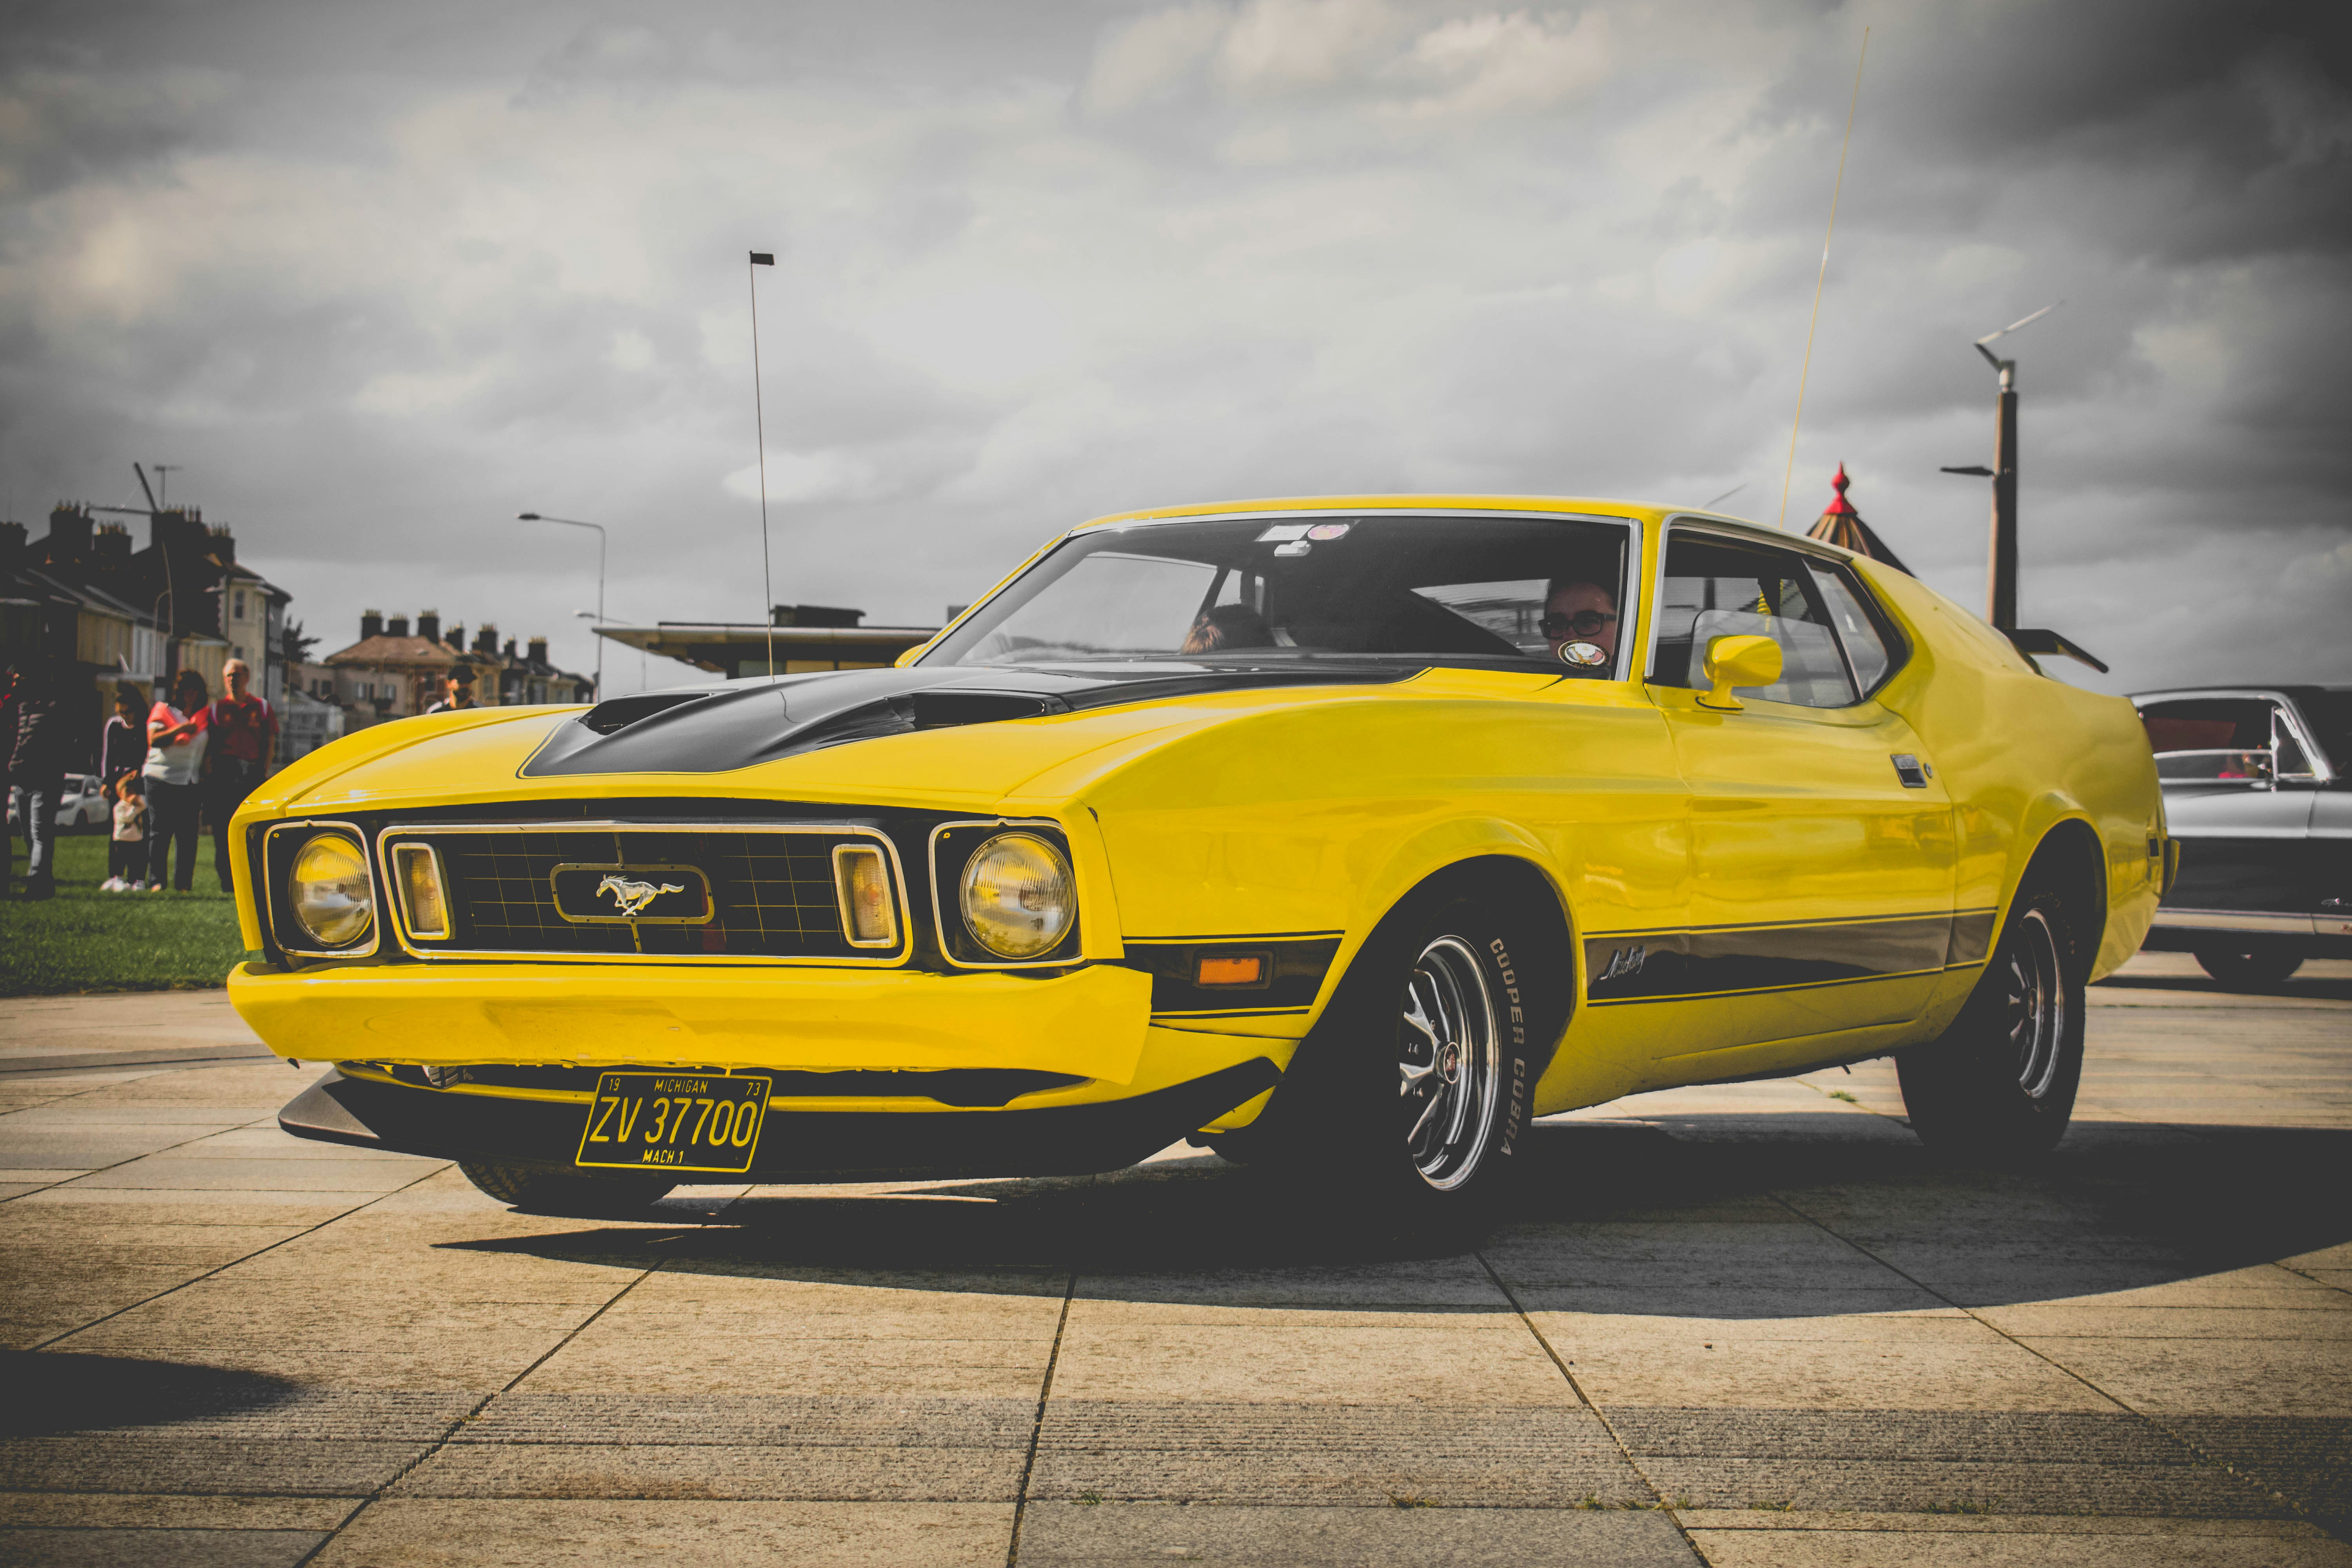 30+ Wallpaper 1920x1080 Ford Mustang 2006 Yellow HD download